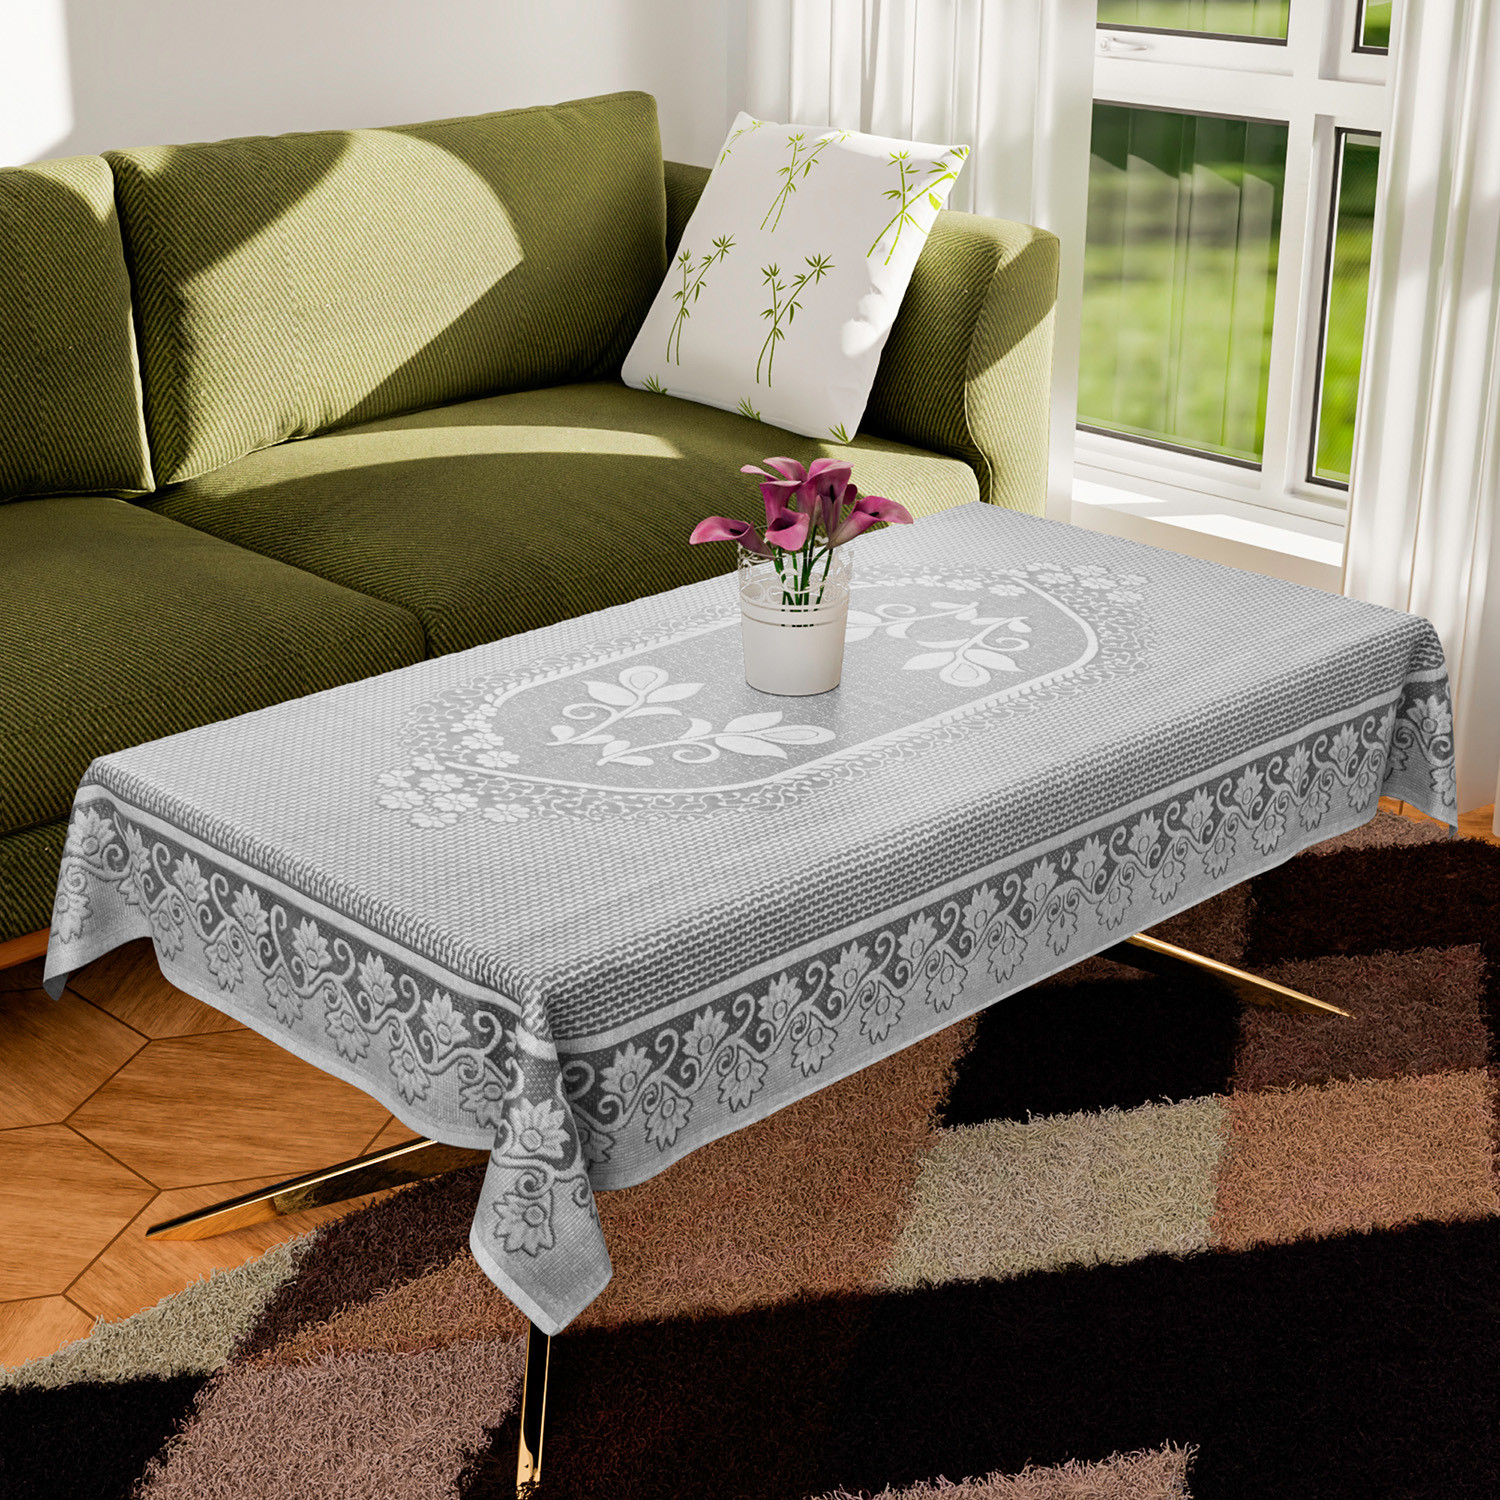 Kuber Industries Center Table Cover|Cotton Luxurious Net Floral S-19 Design|Stain-Resistant & Anti Skid Coffee Table Cover|40x60 Inch (White)